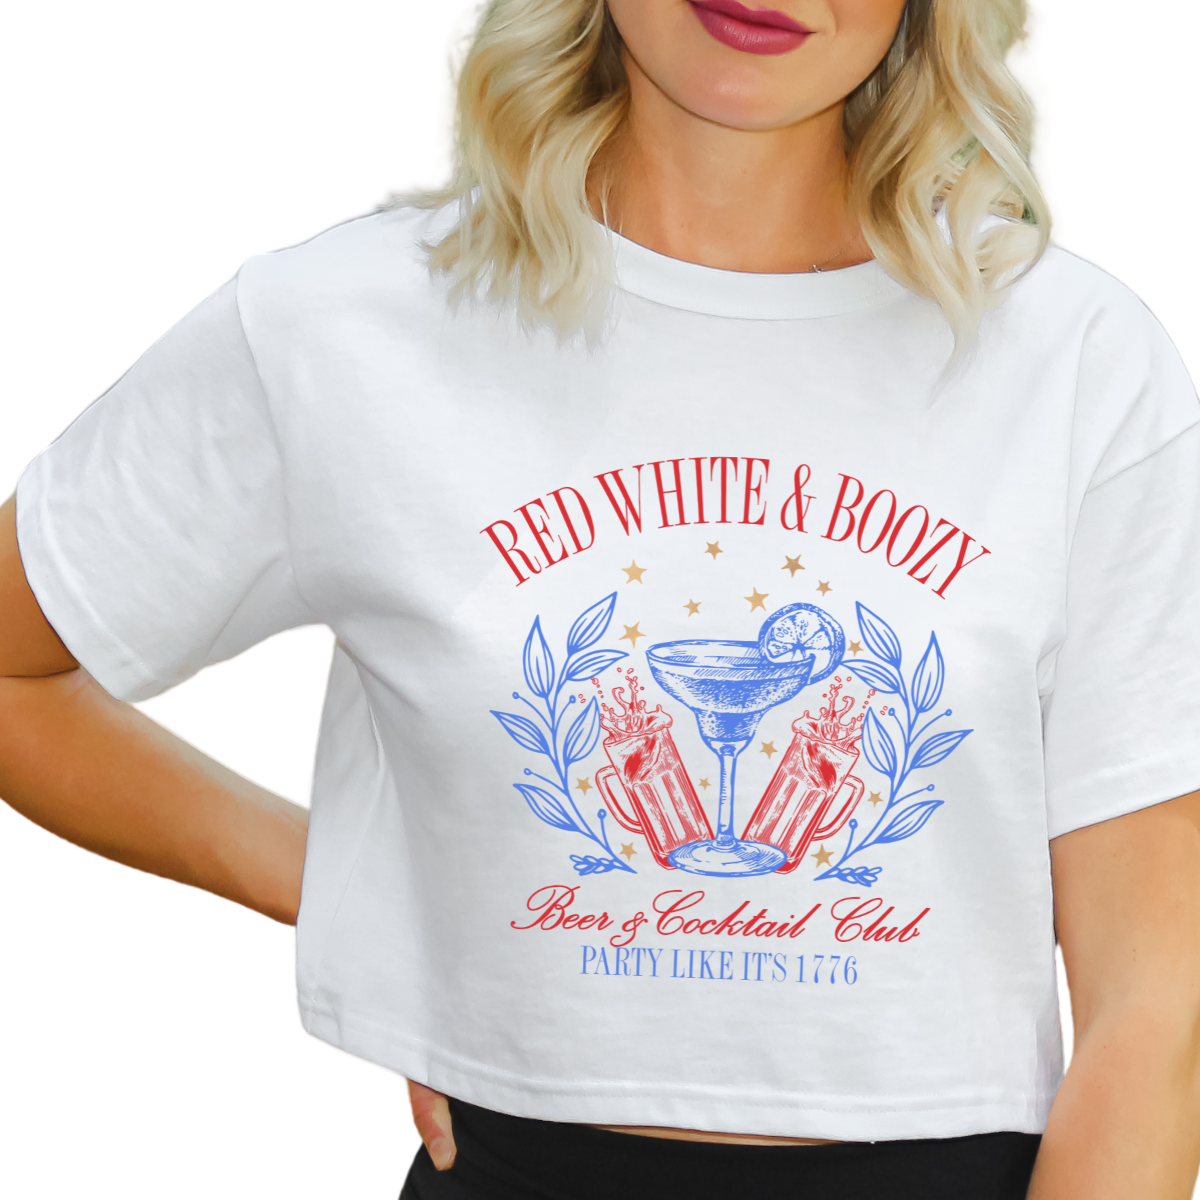 Red White & Boozy, Beer and Cocktail Club, Party Like it's 1776